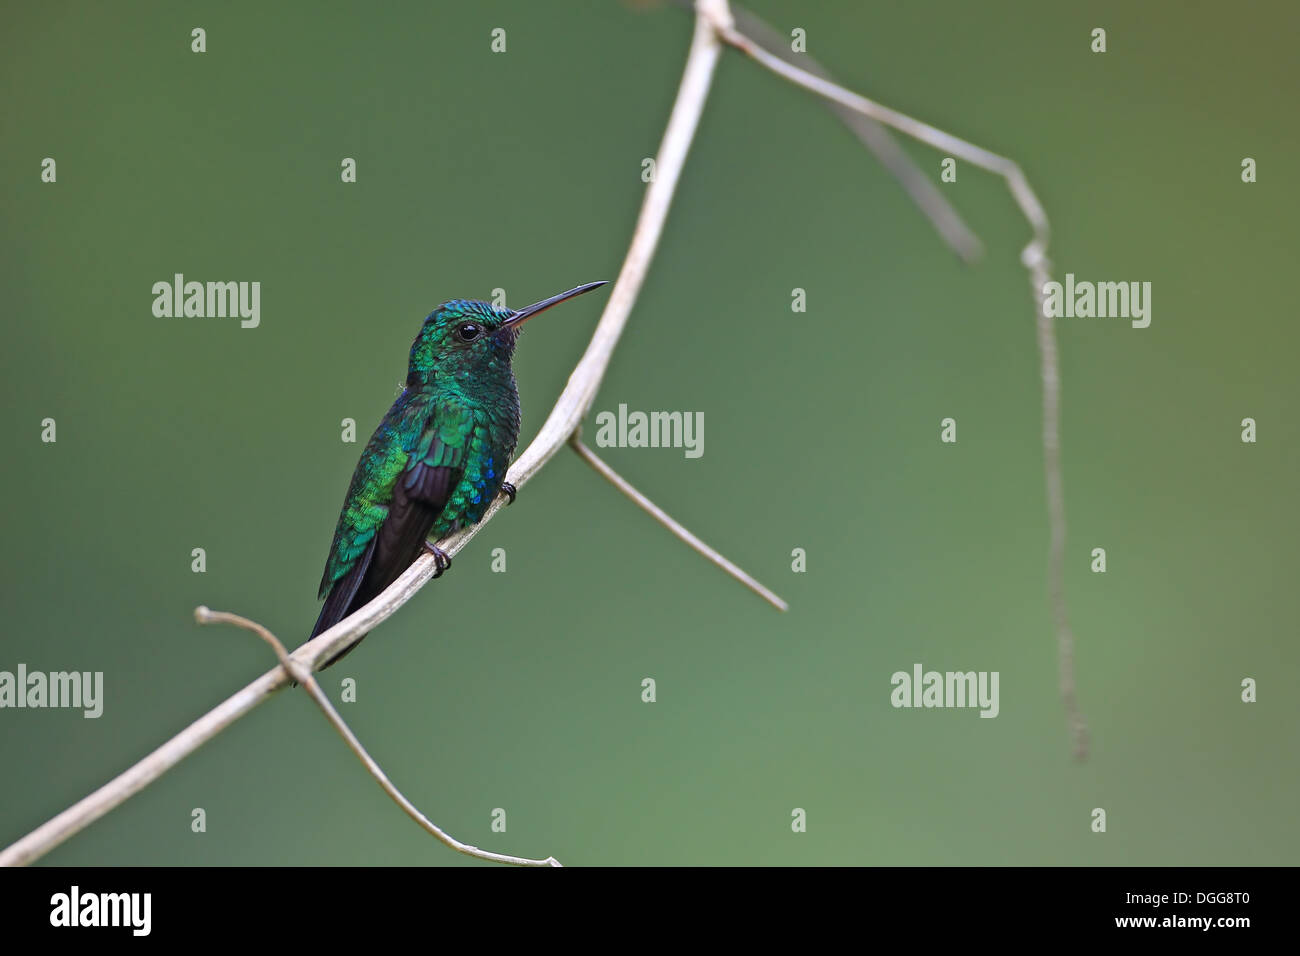 Blue-chinned Sapphire (Chlorestes notatus) adult male, perched on stem, Trinidad, Trinidad and Tobago, April Stock Photo